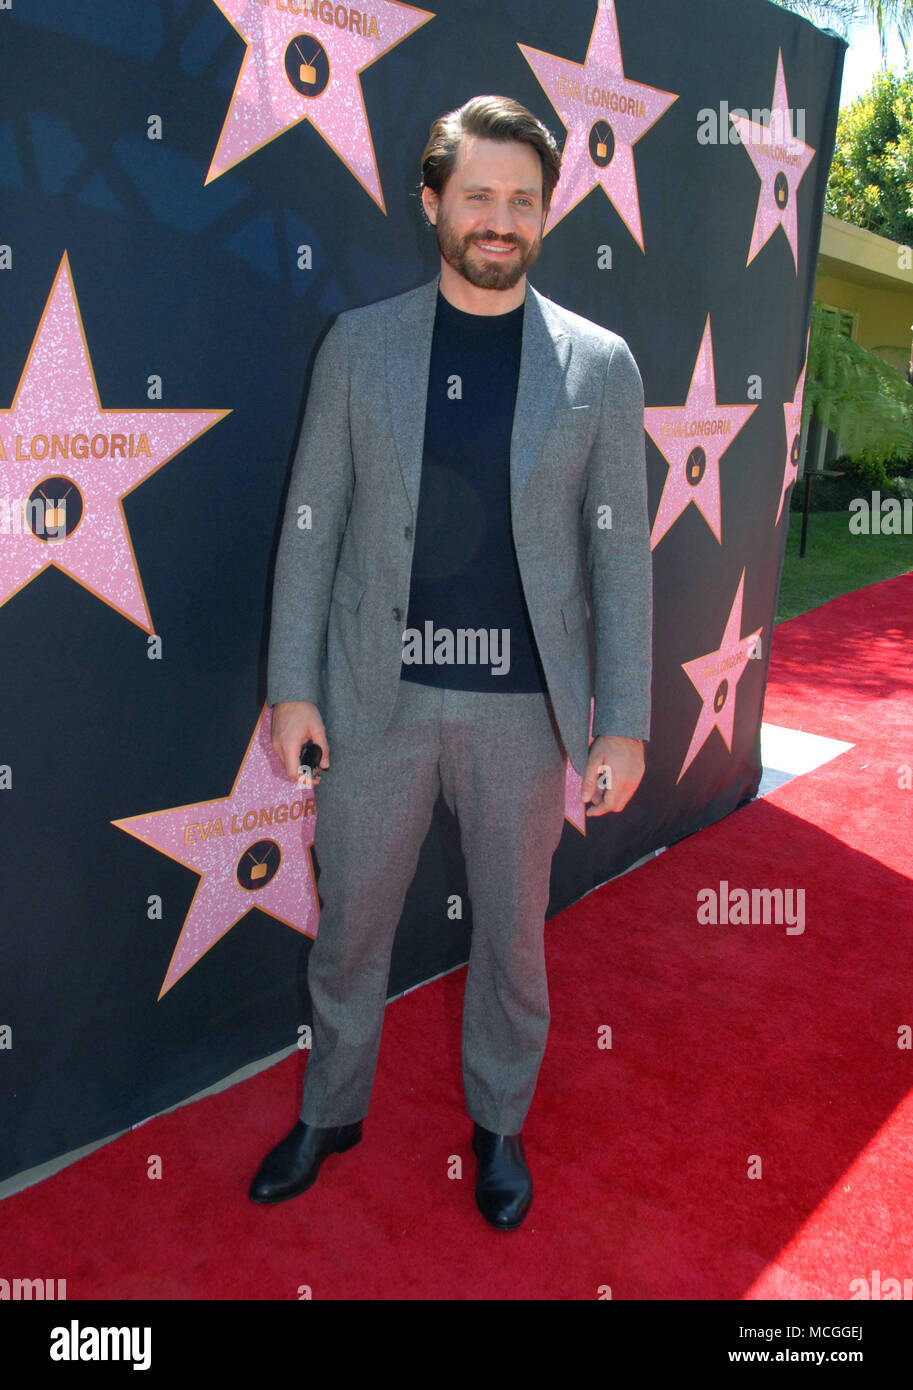 BEVERLY HILLS, CA - APRIL 16: Actor Edgar Ramirez attends post reception luncheon for Eva Longoria Star on Walk of Fame on April 16, 2018 in Beverly Hills, California. Photo by Barry King/Alamy Live News Stock Photo